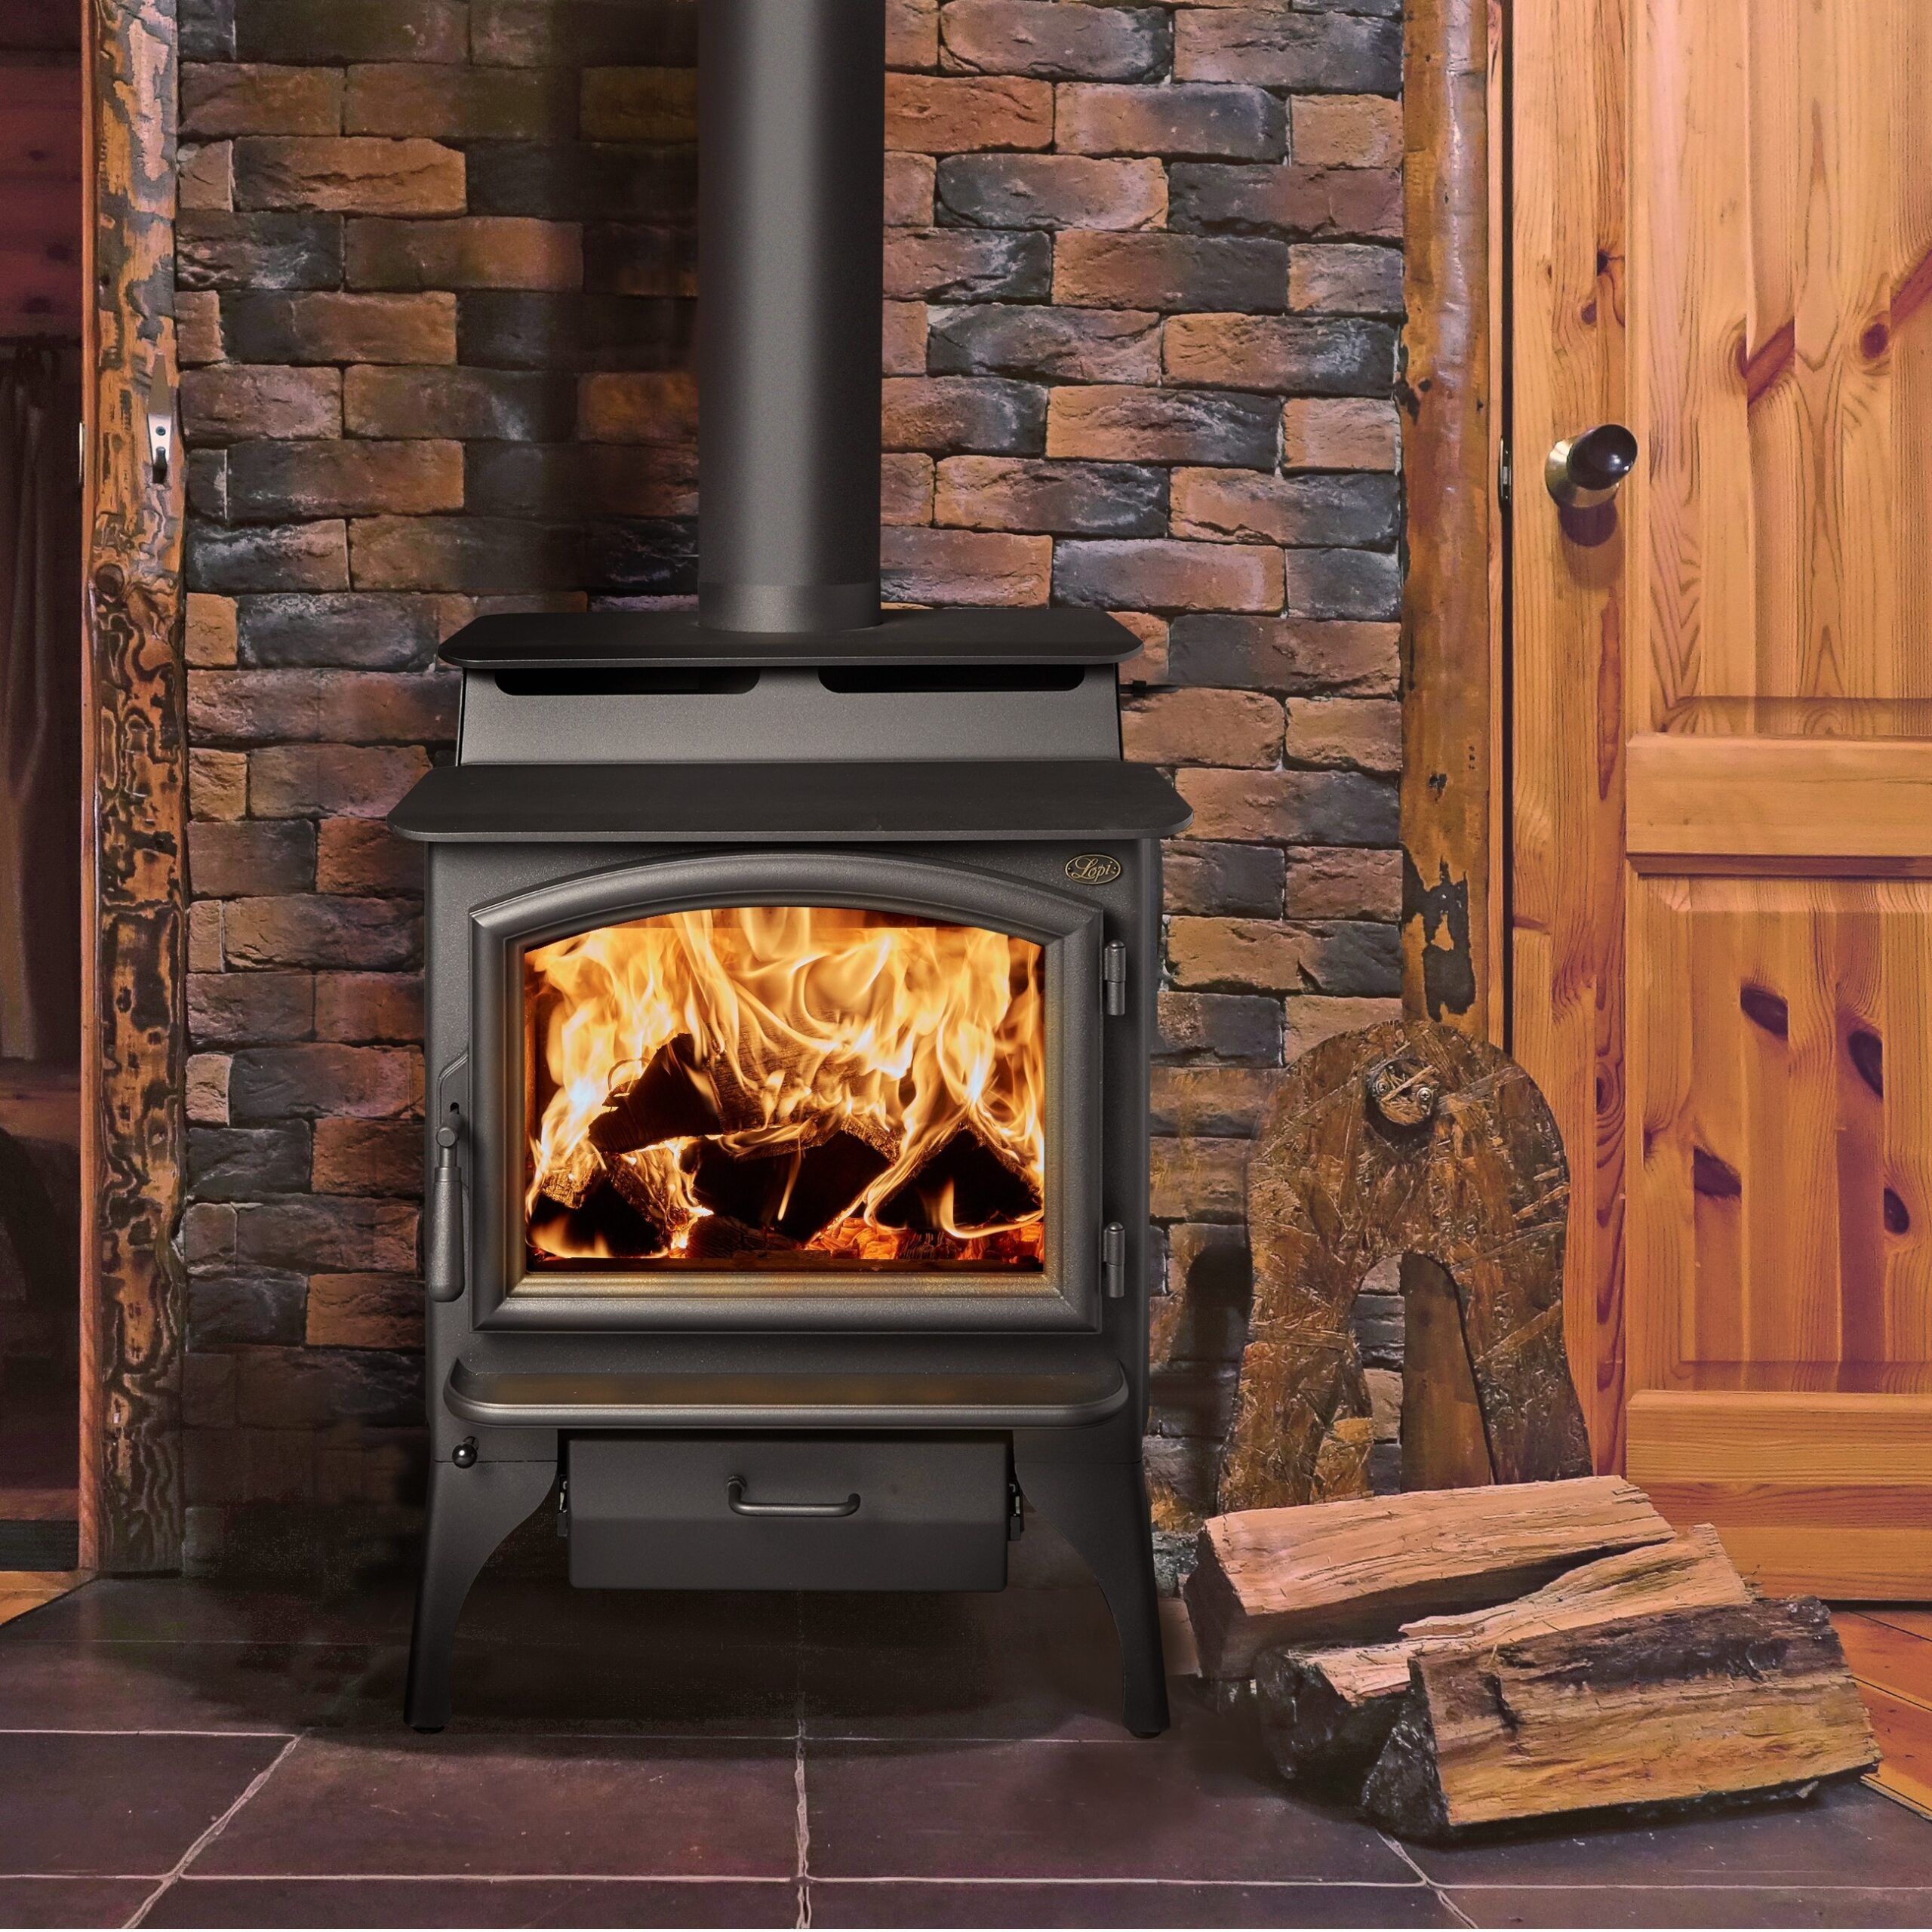 Wood Stoves 101